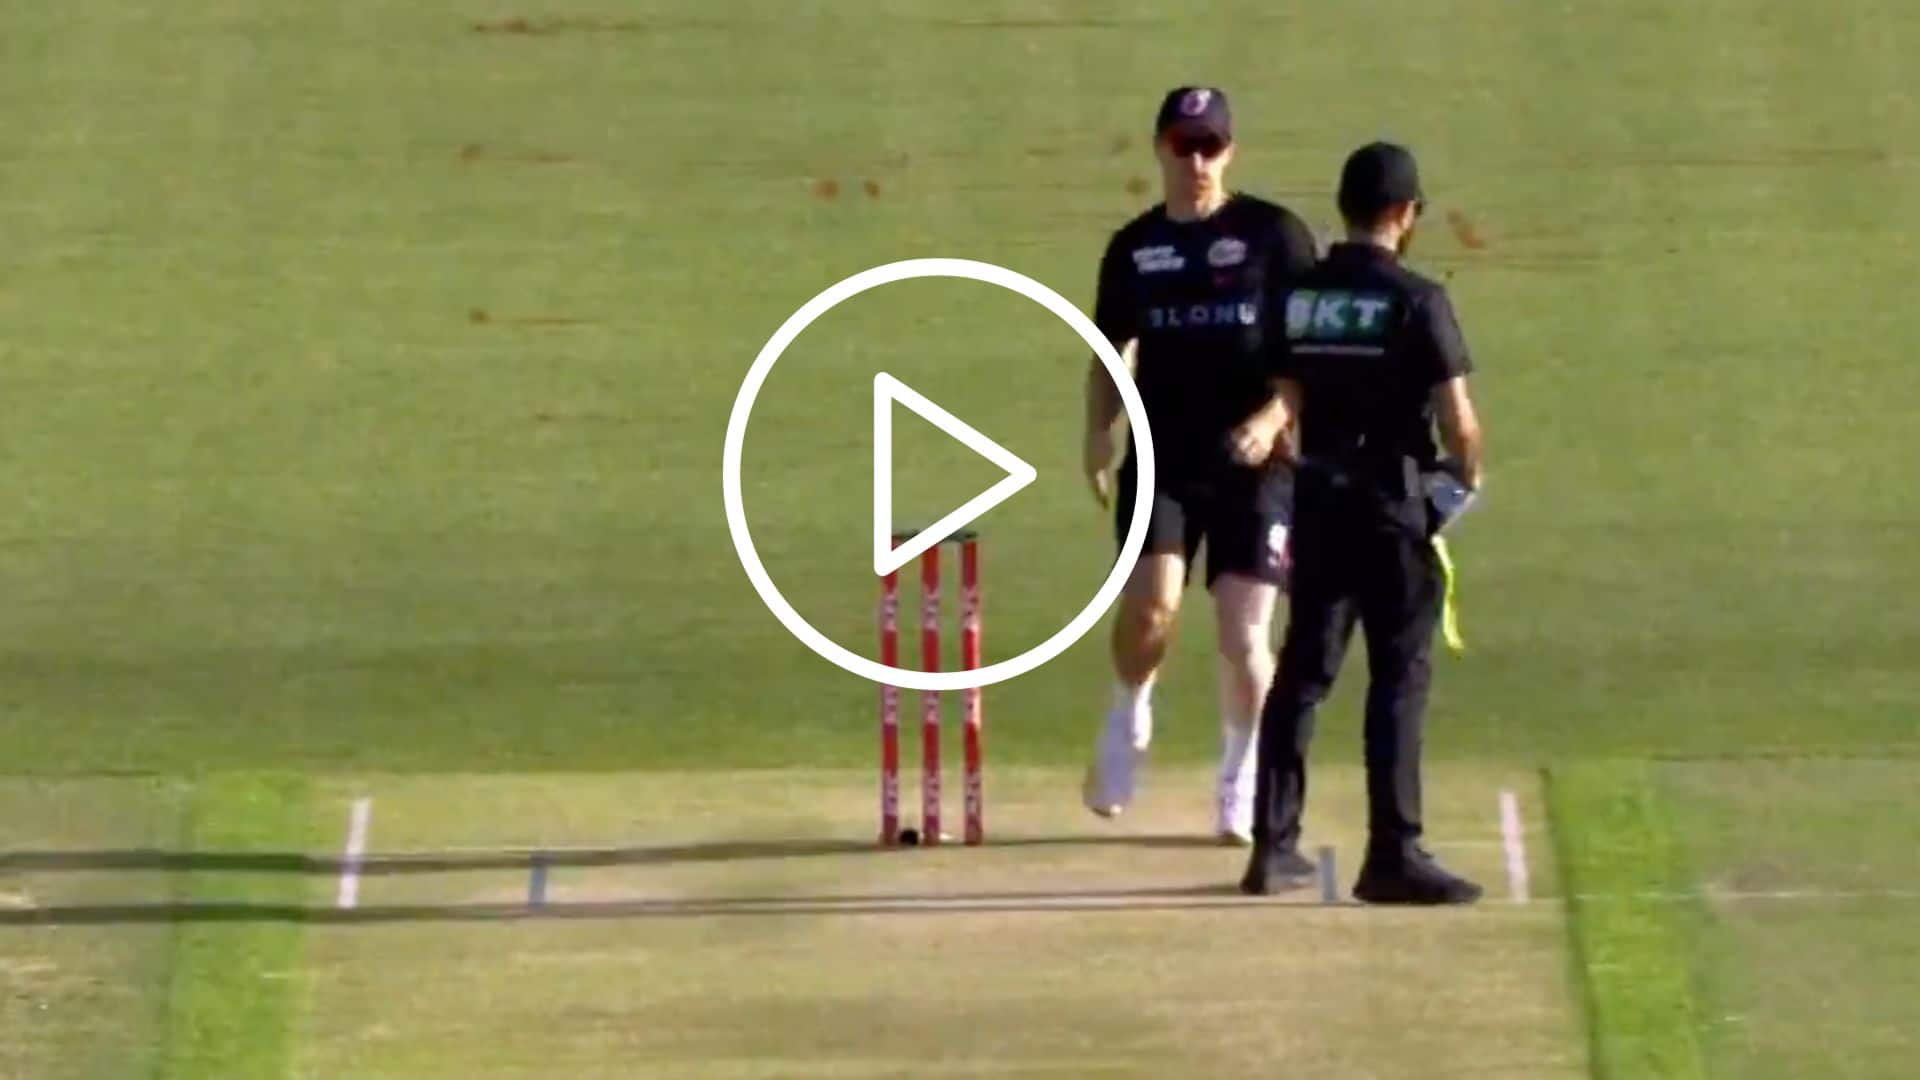 [Watch] Tom Curran Deliberately Ignores Umpire & Runs On Pitch; Faces 4-Match Ban